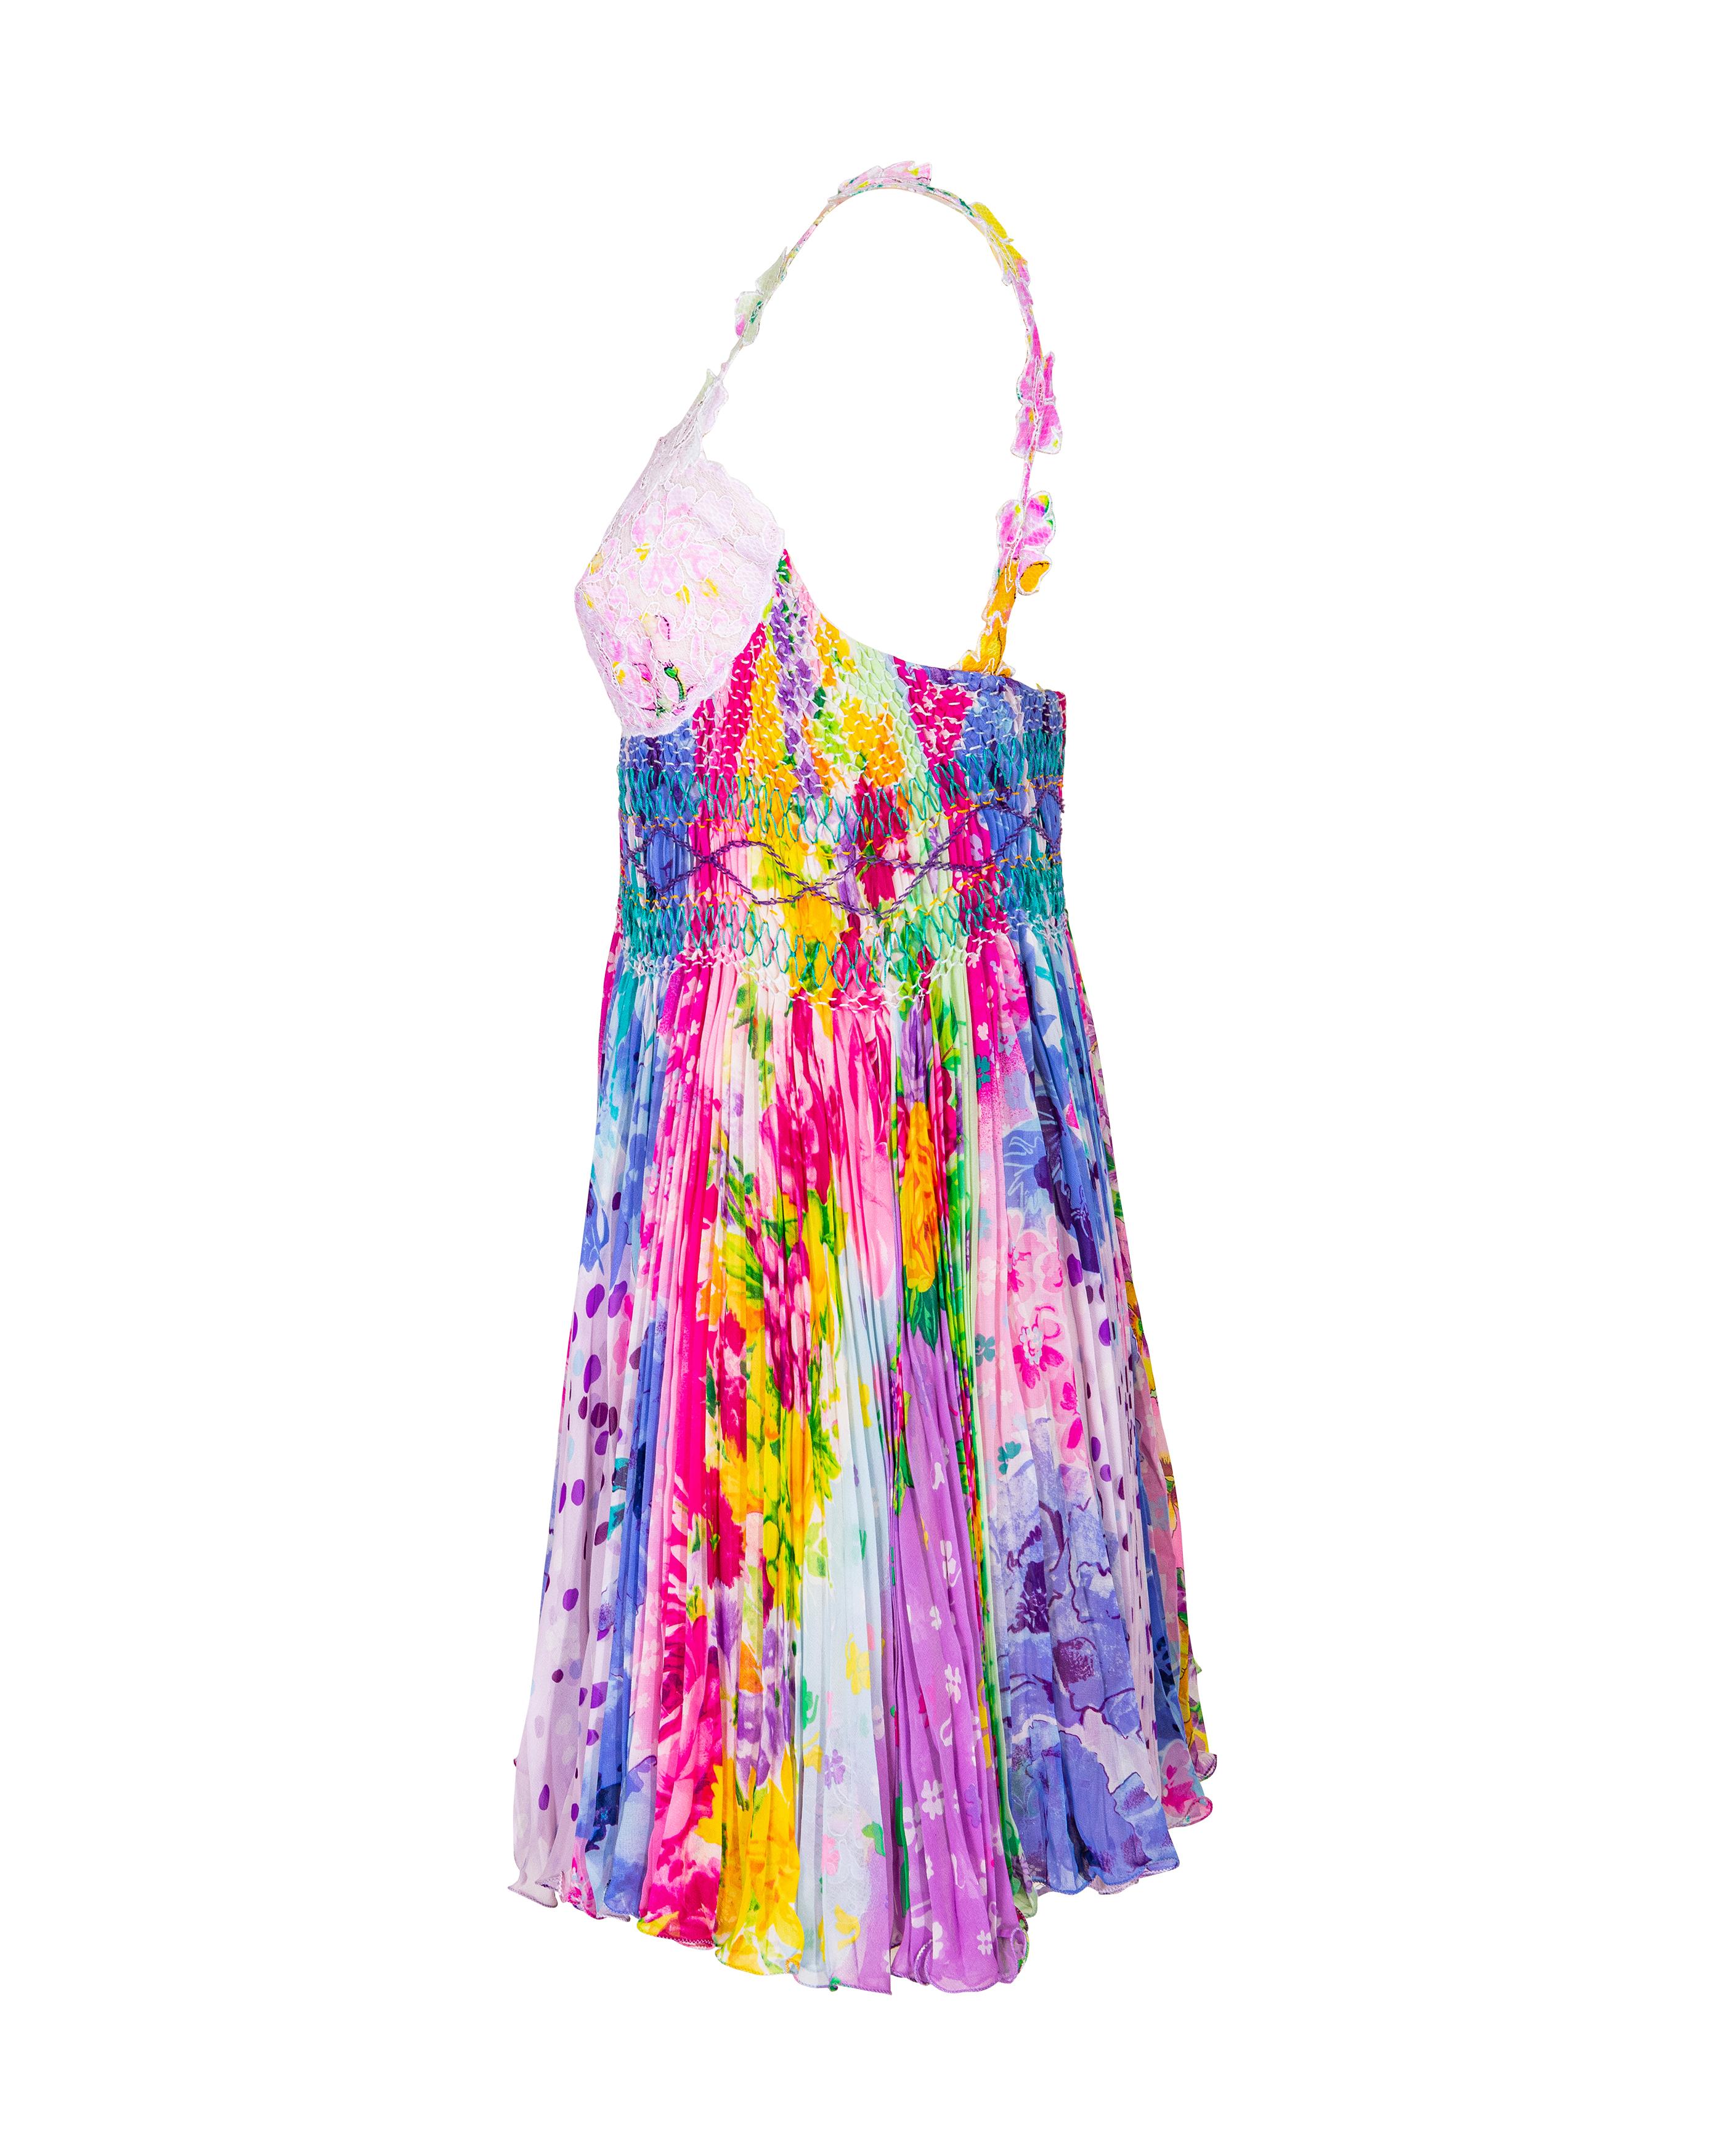 S/S 1994 Gianni Versace Multicolor Floral Pleated Honeycomb Mini Dress In Excellent Condition In North Hollywood, CA